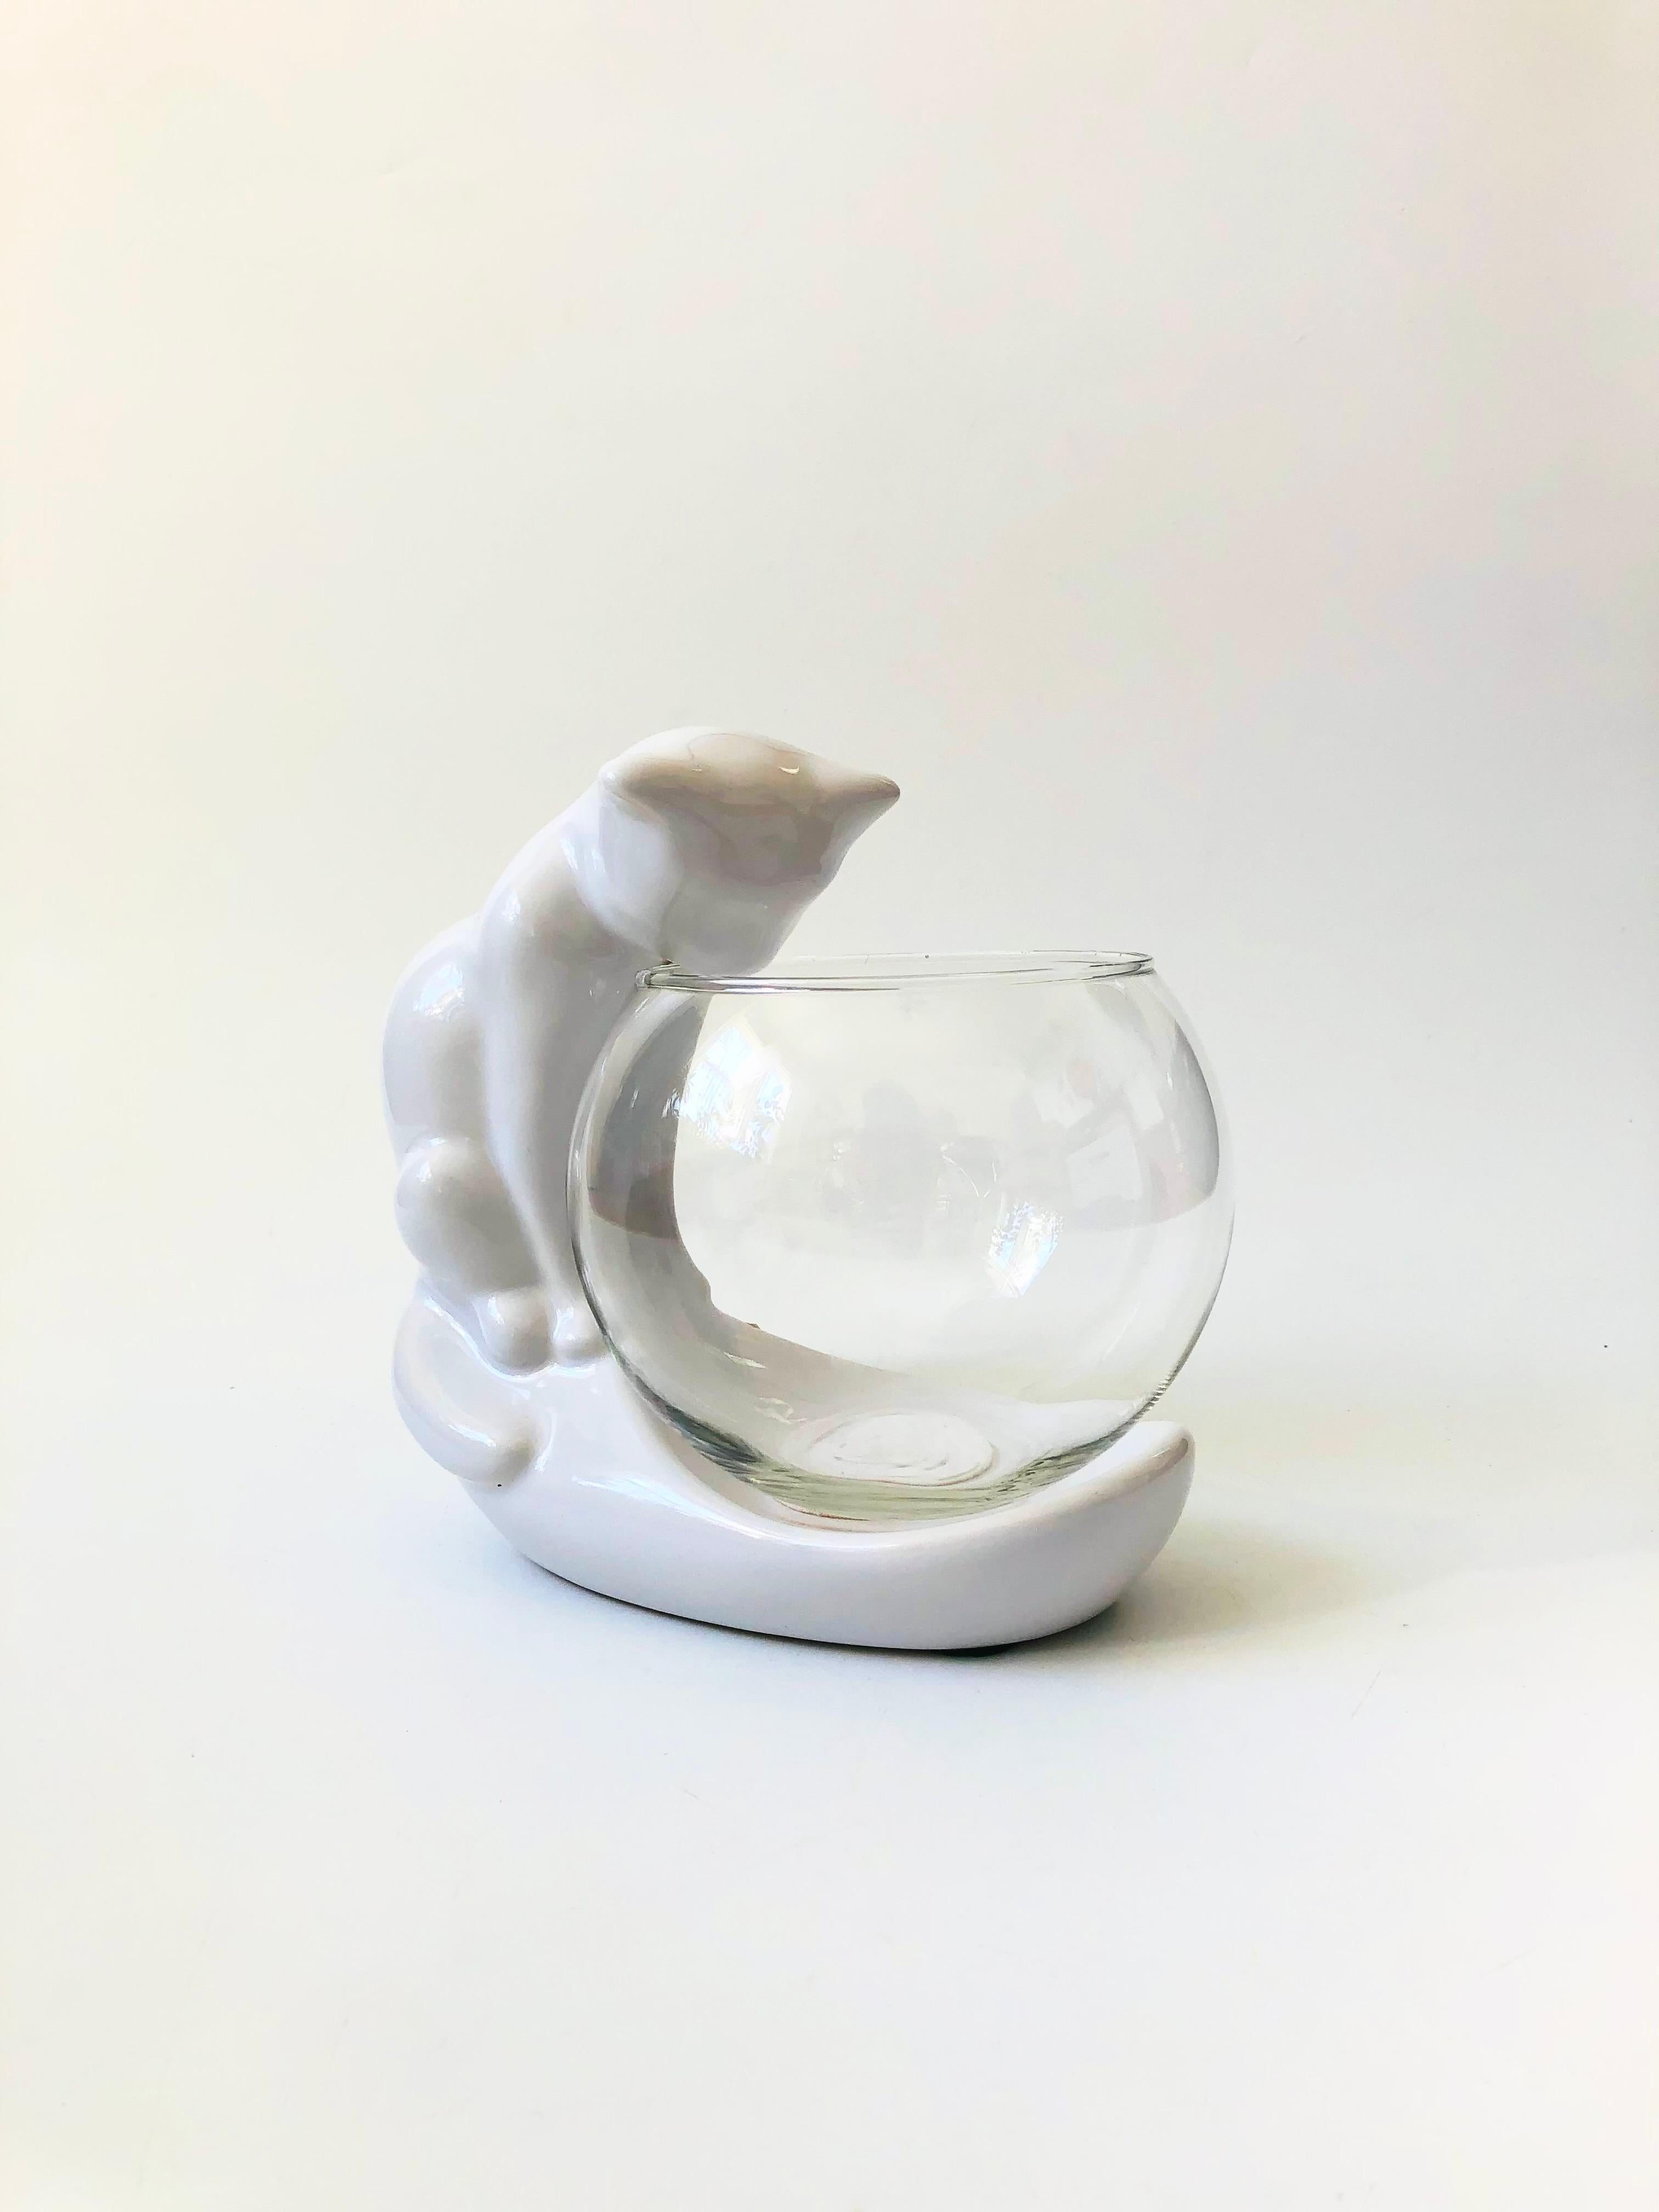 A wonderful vintage cat fishbowl from the 1980s. The fishbowl stand is made of glossy white ceramic in the shape of a cat peering down into the bowl. The glass bowl would be perfect for keeping a small fish or using as a terrarium. Made by Haeger